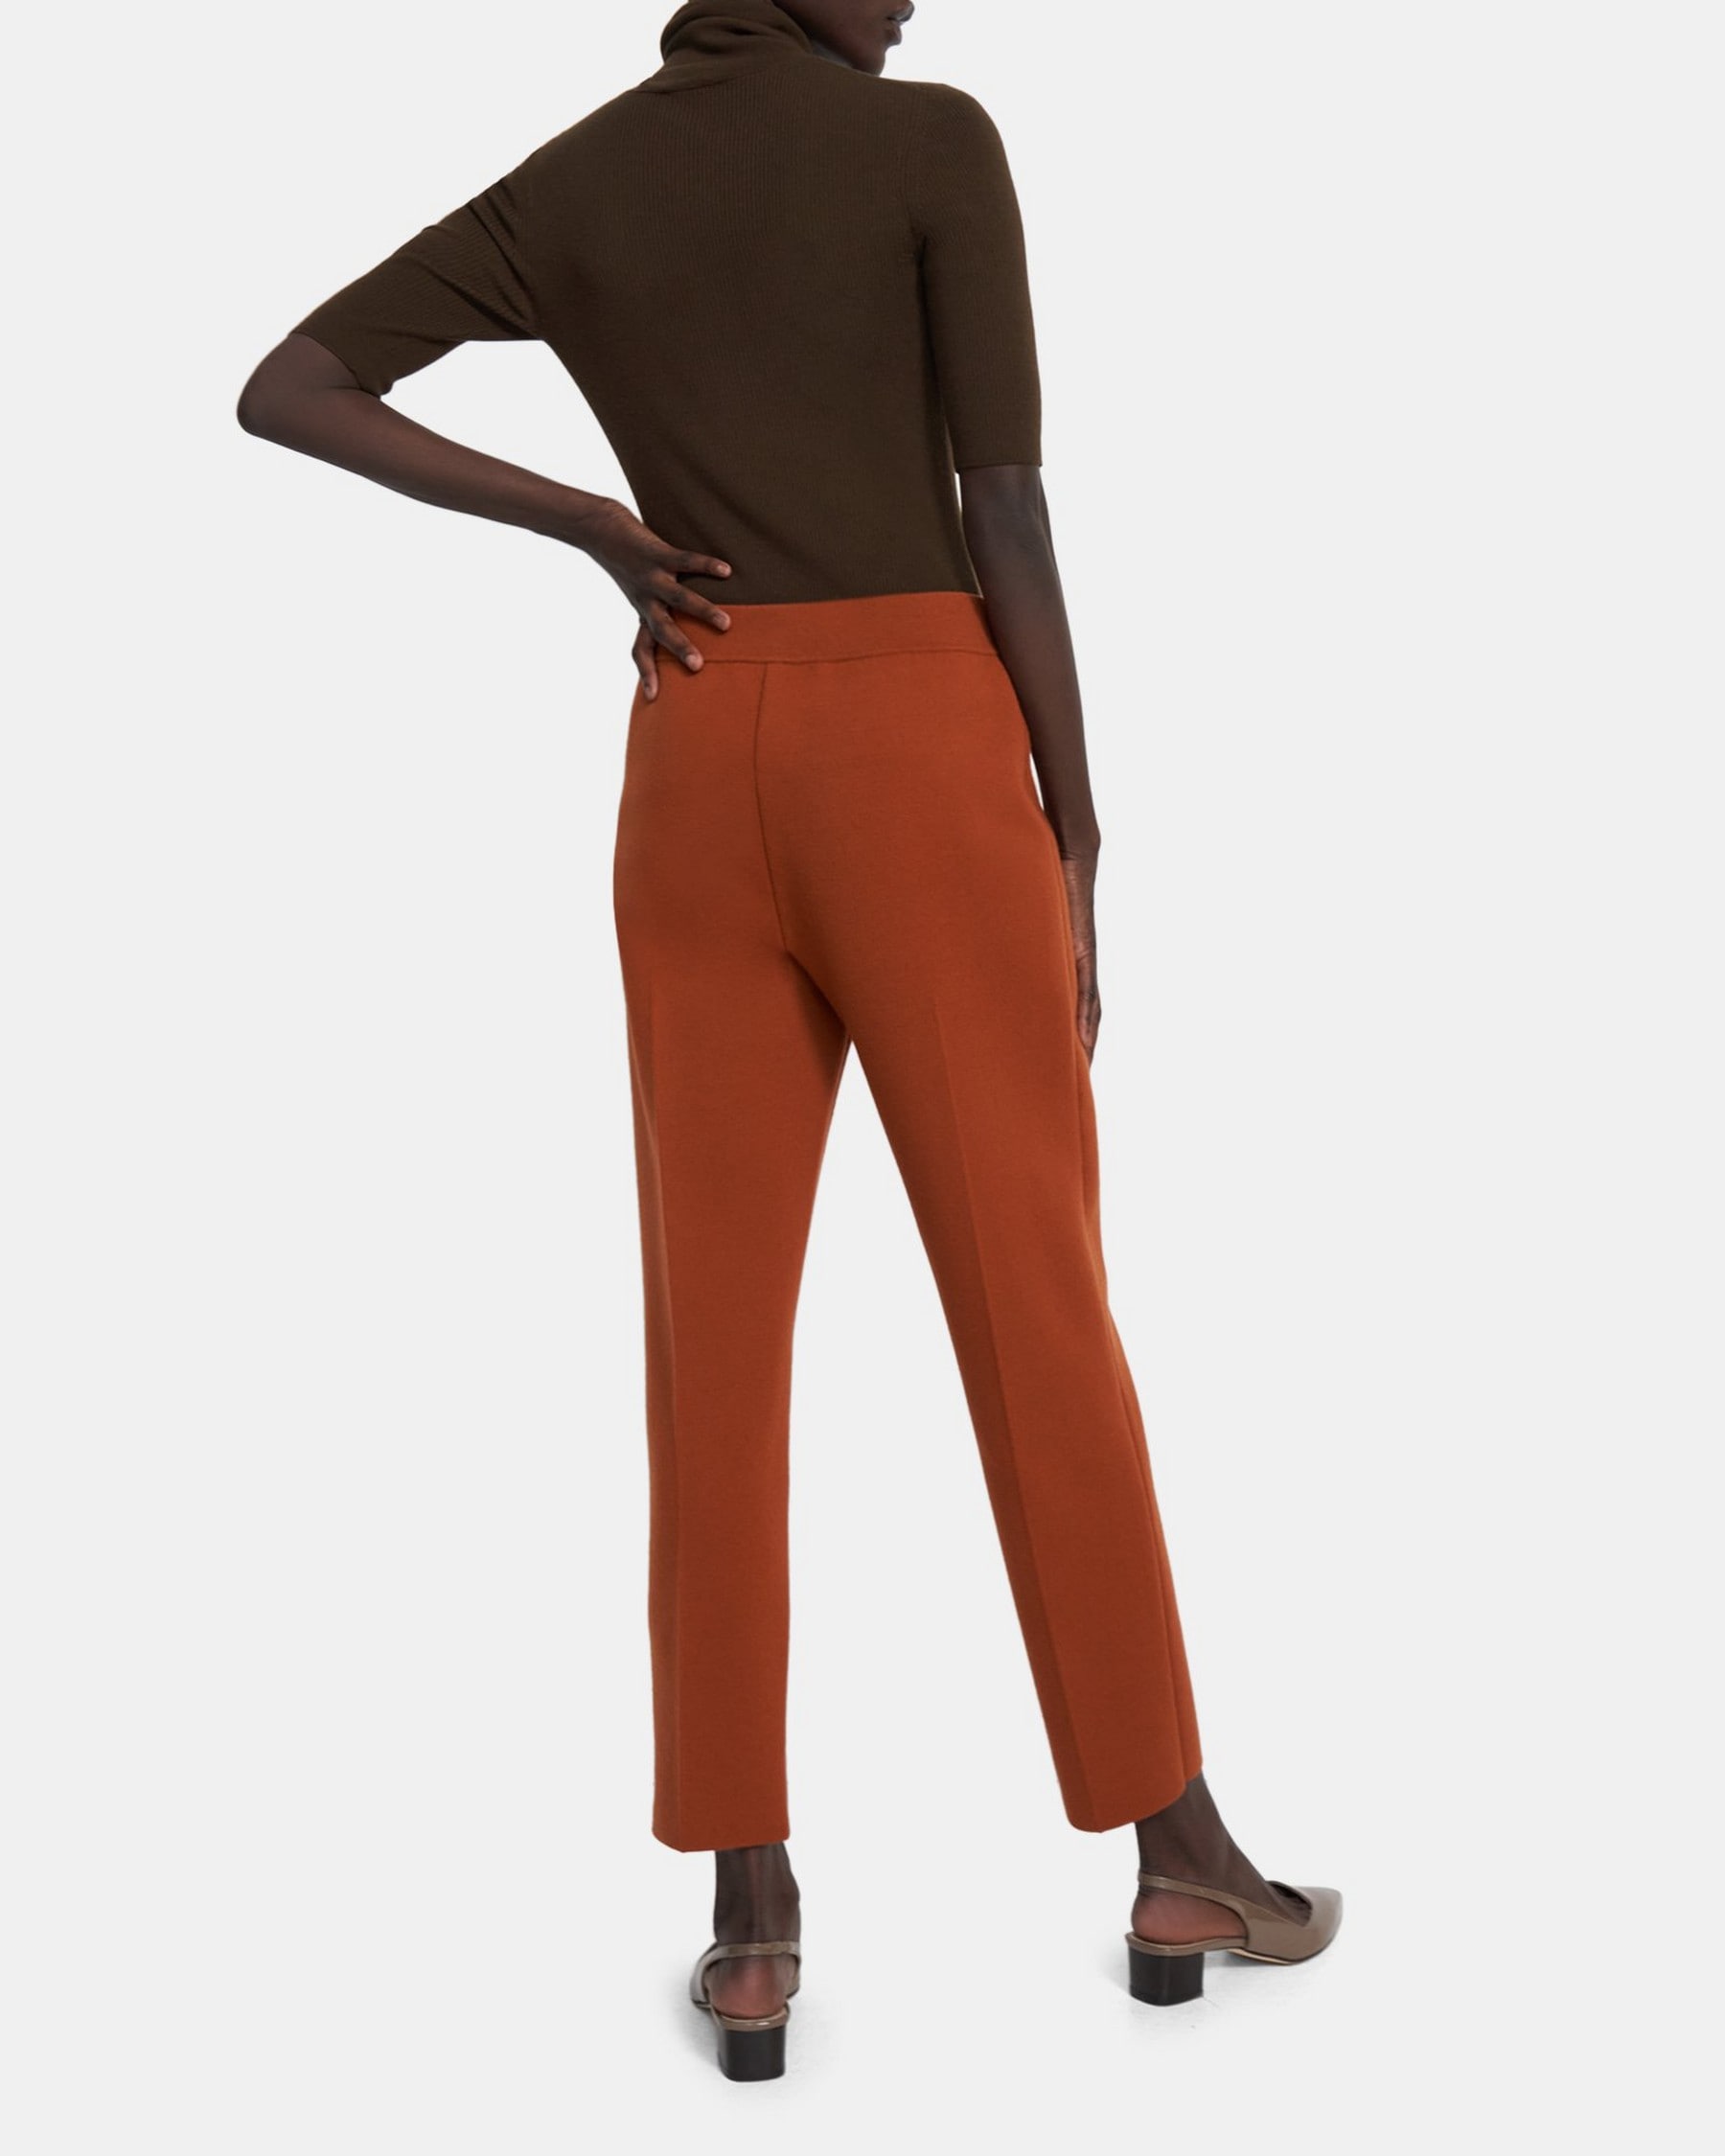 Treeca Pull-On Pant in Empire Wool